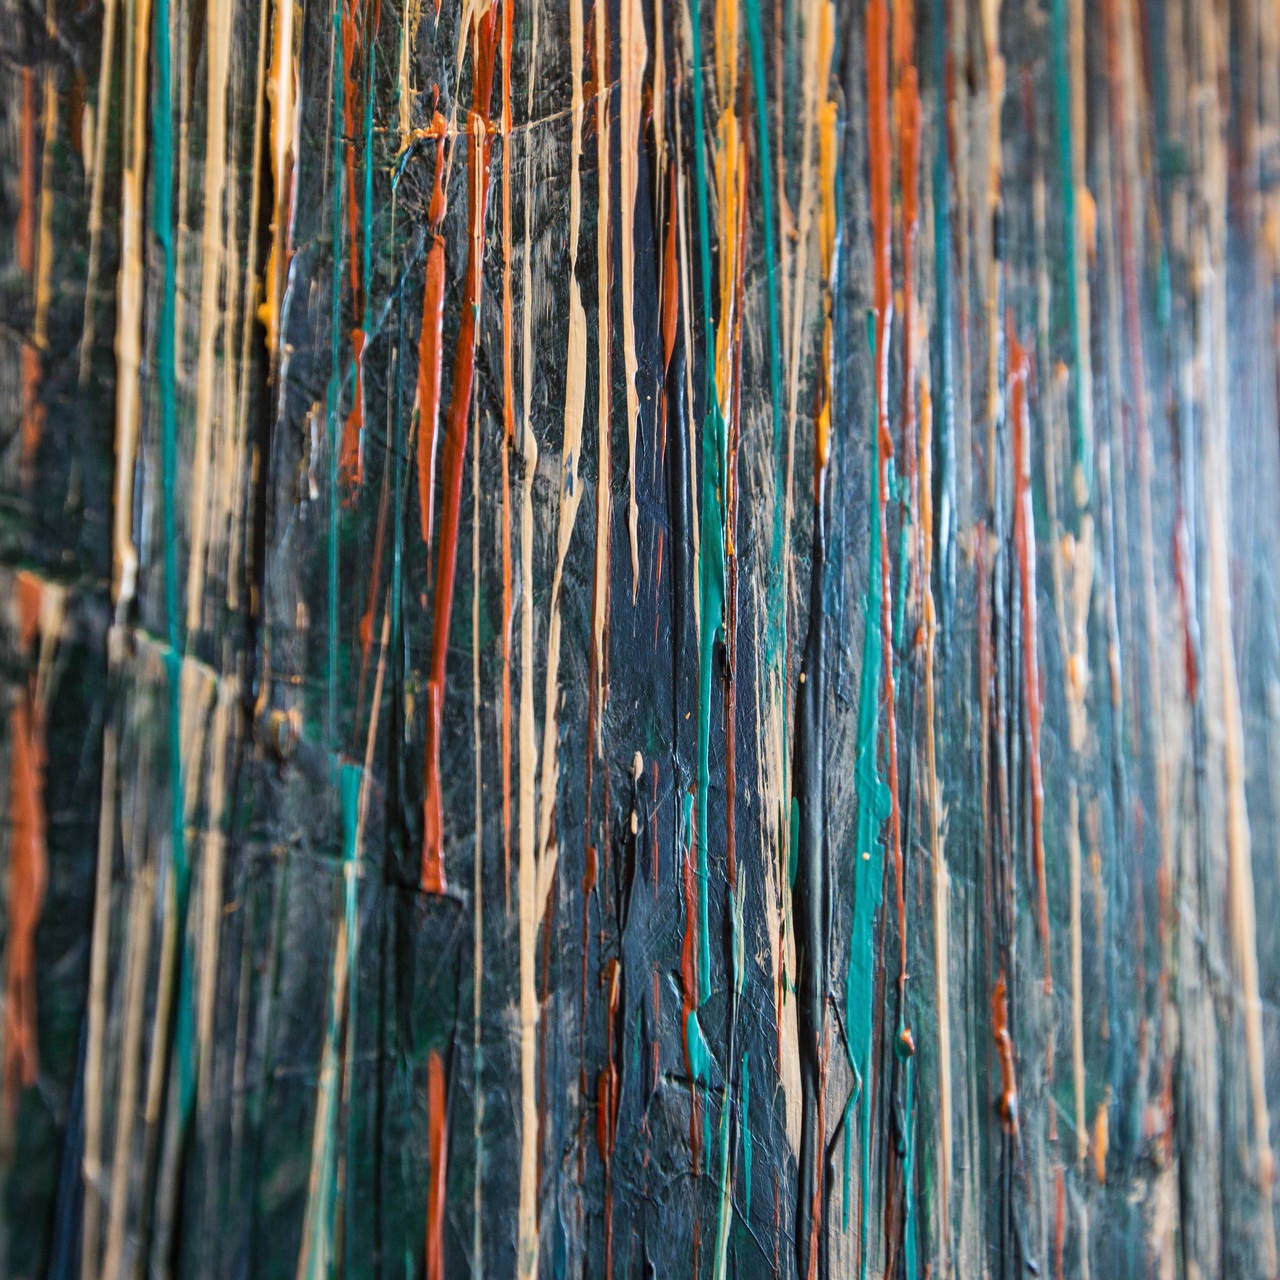 Like a close up study of a painter's brush with years of painting upon it, this abstract is striking in it's use of color laid down in fine bristle like strokes.